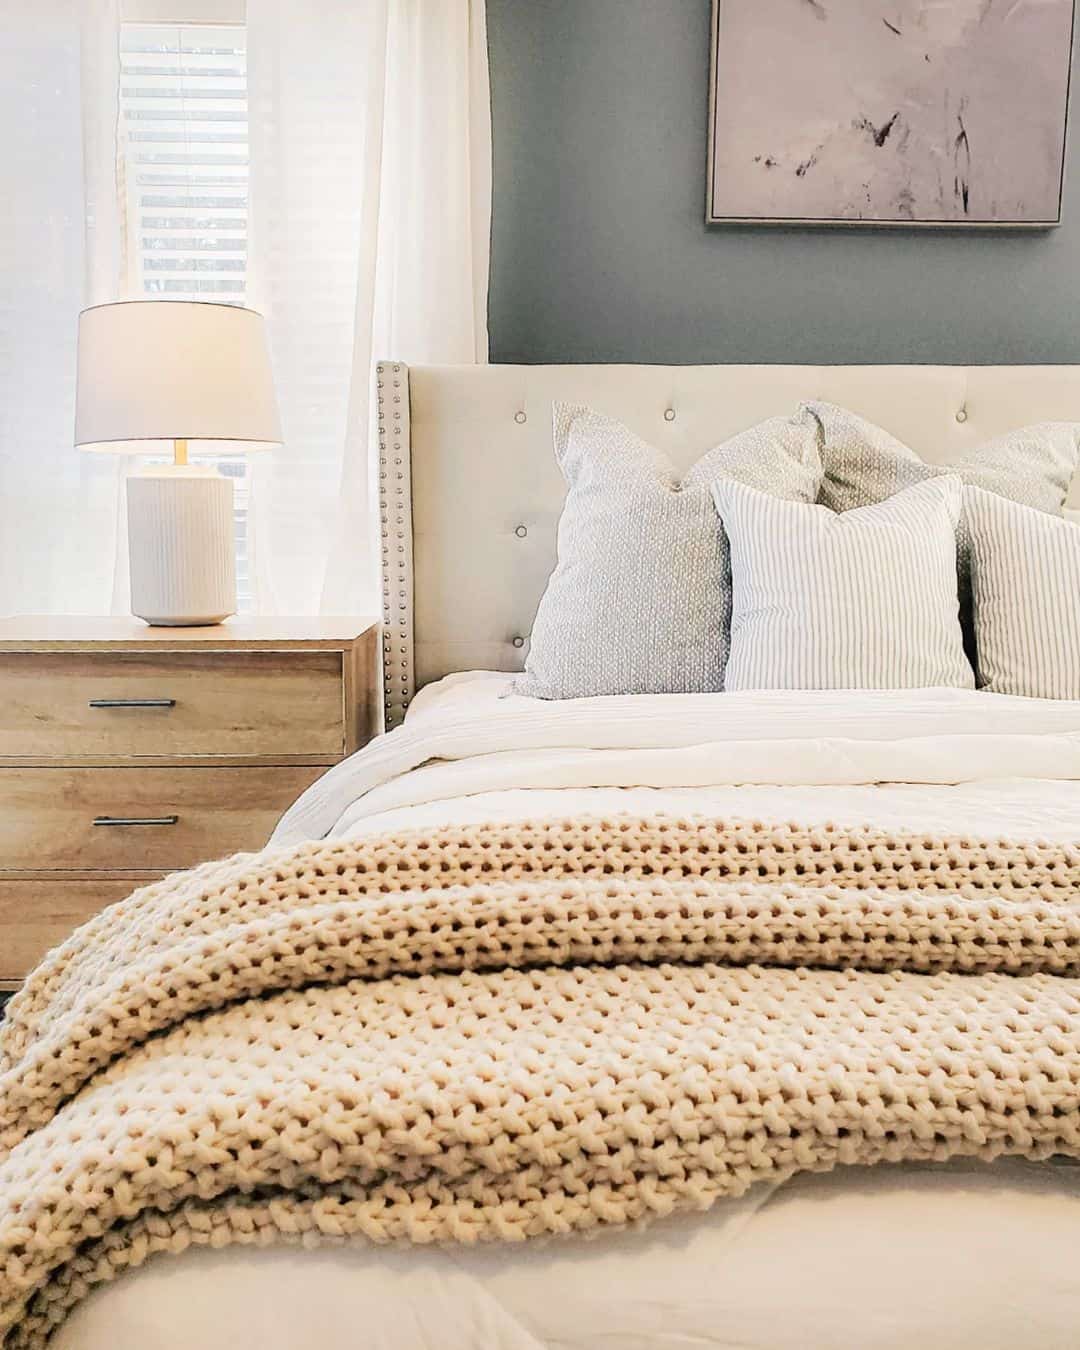 Neutral, layered bedding 🤎🥥  Neutral bedroom decor, Cream and